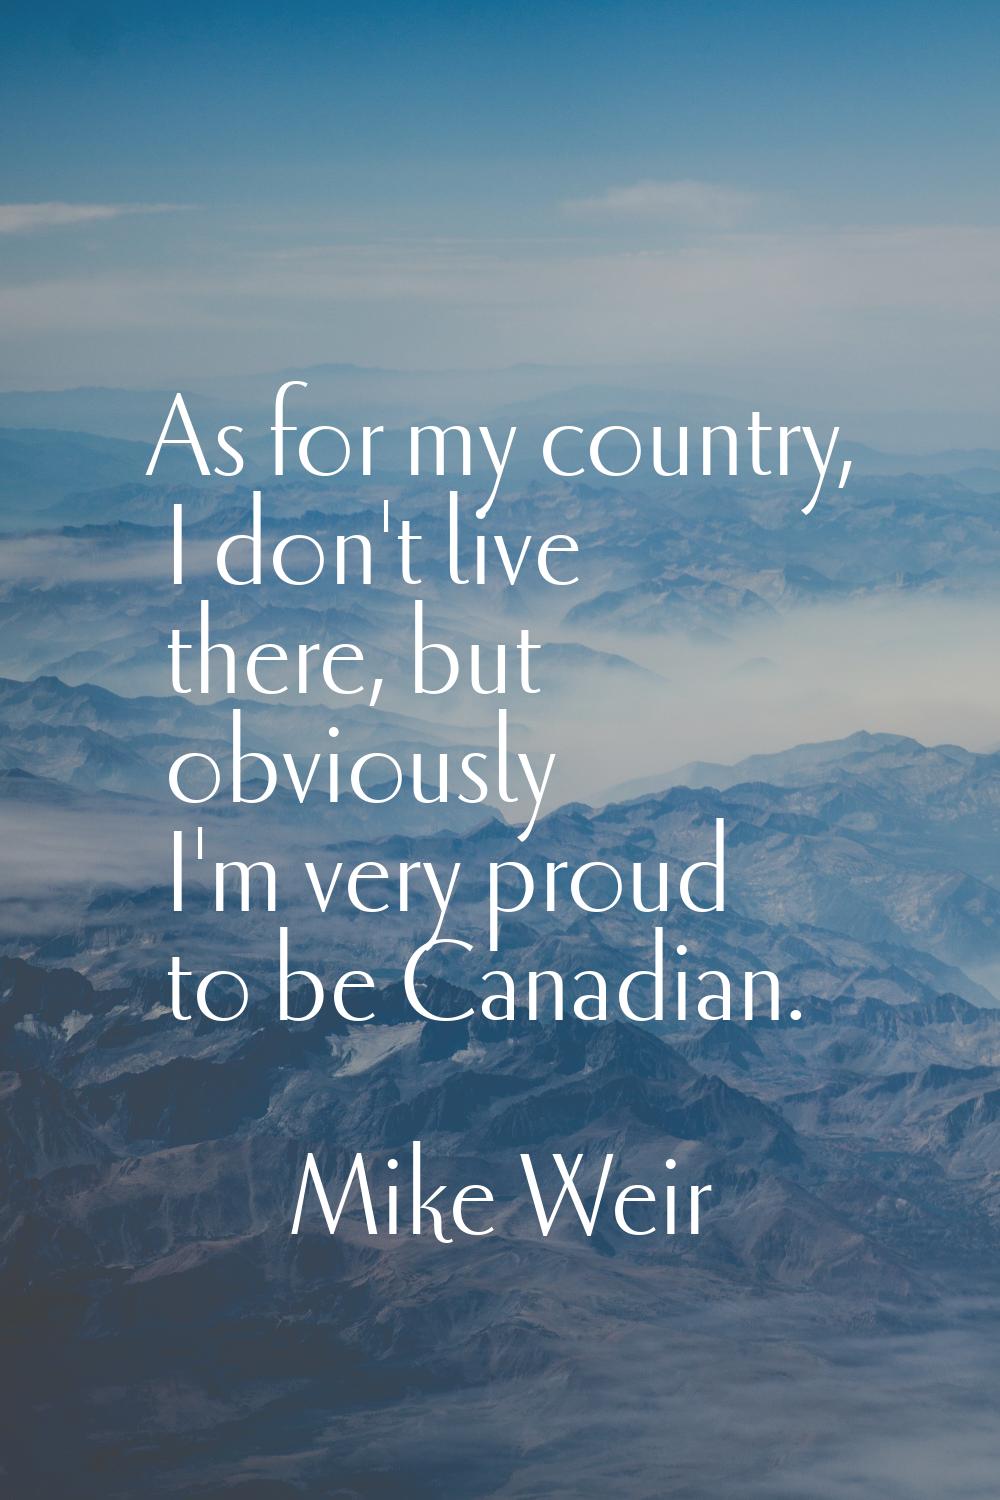 As for my country, I don't live there, but obviously I'm very proud to be Canadian.